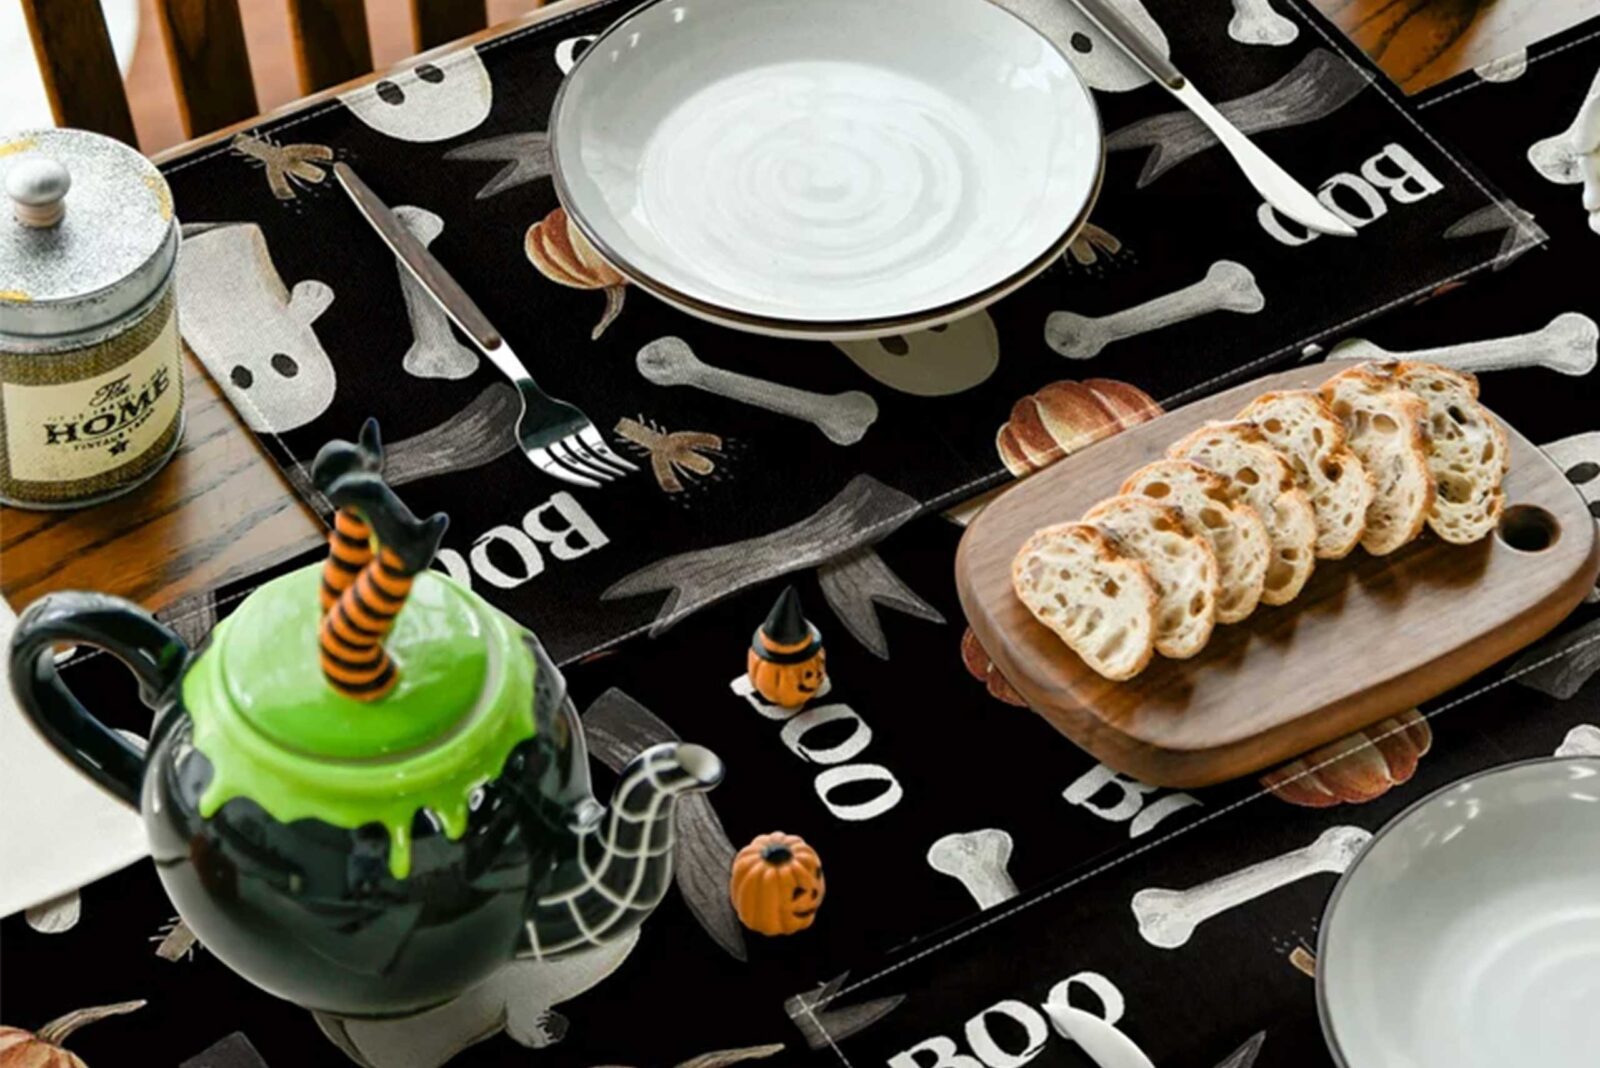 14 Cute Halloween Decorations for a Sweet (Not Spooky!) Holiday